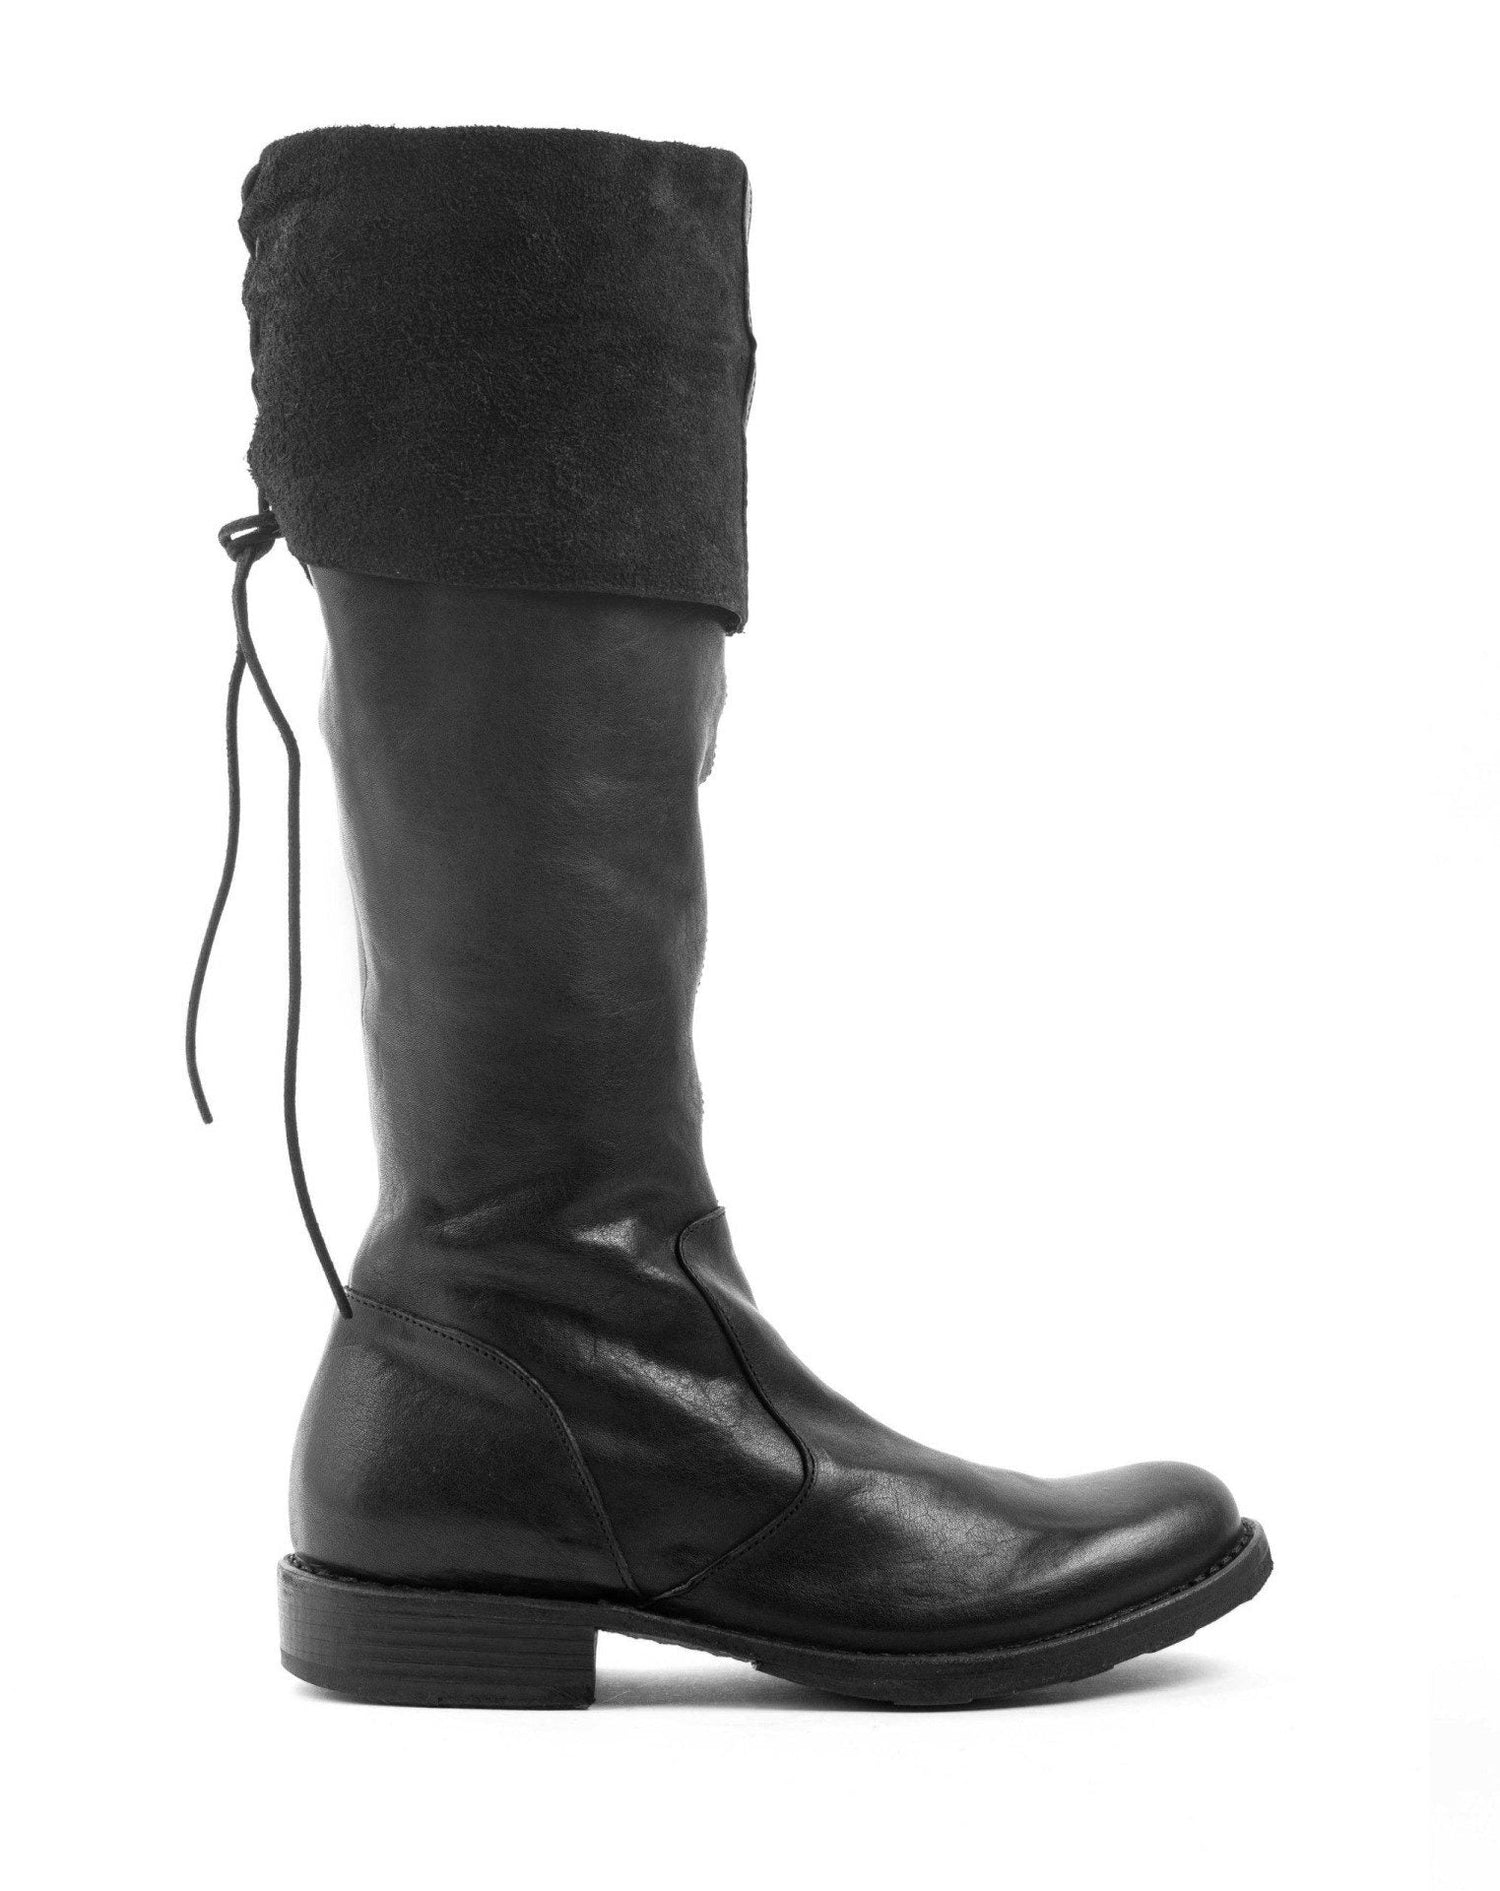 FIORENTINI+BAKER, ETERNITY 705, Over the knee boot featuring a cuff that can be folded down. Handcrafted with natural leather by skilled artisans. Made in Italy. Made to last.